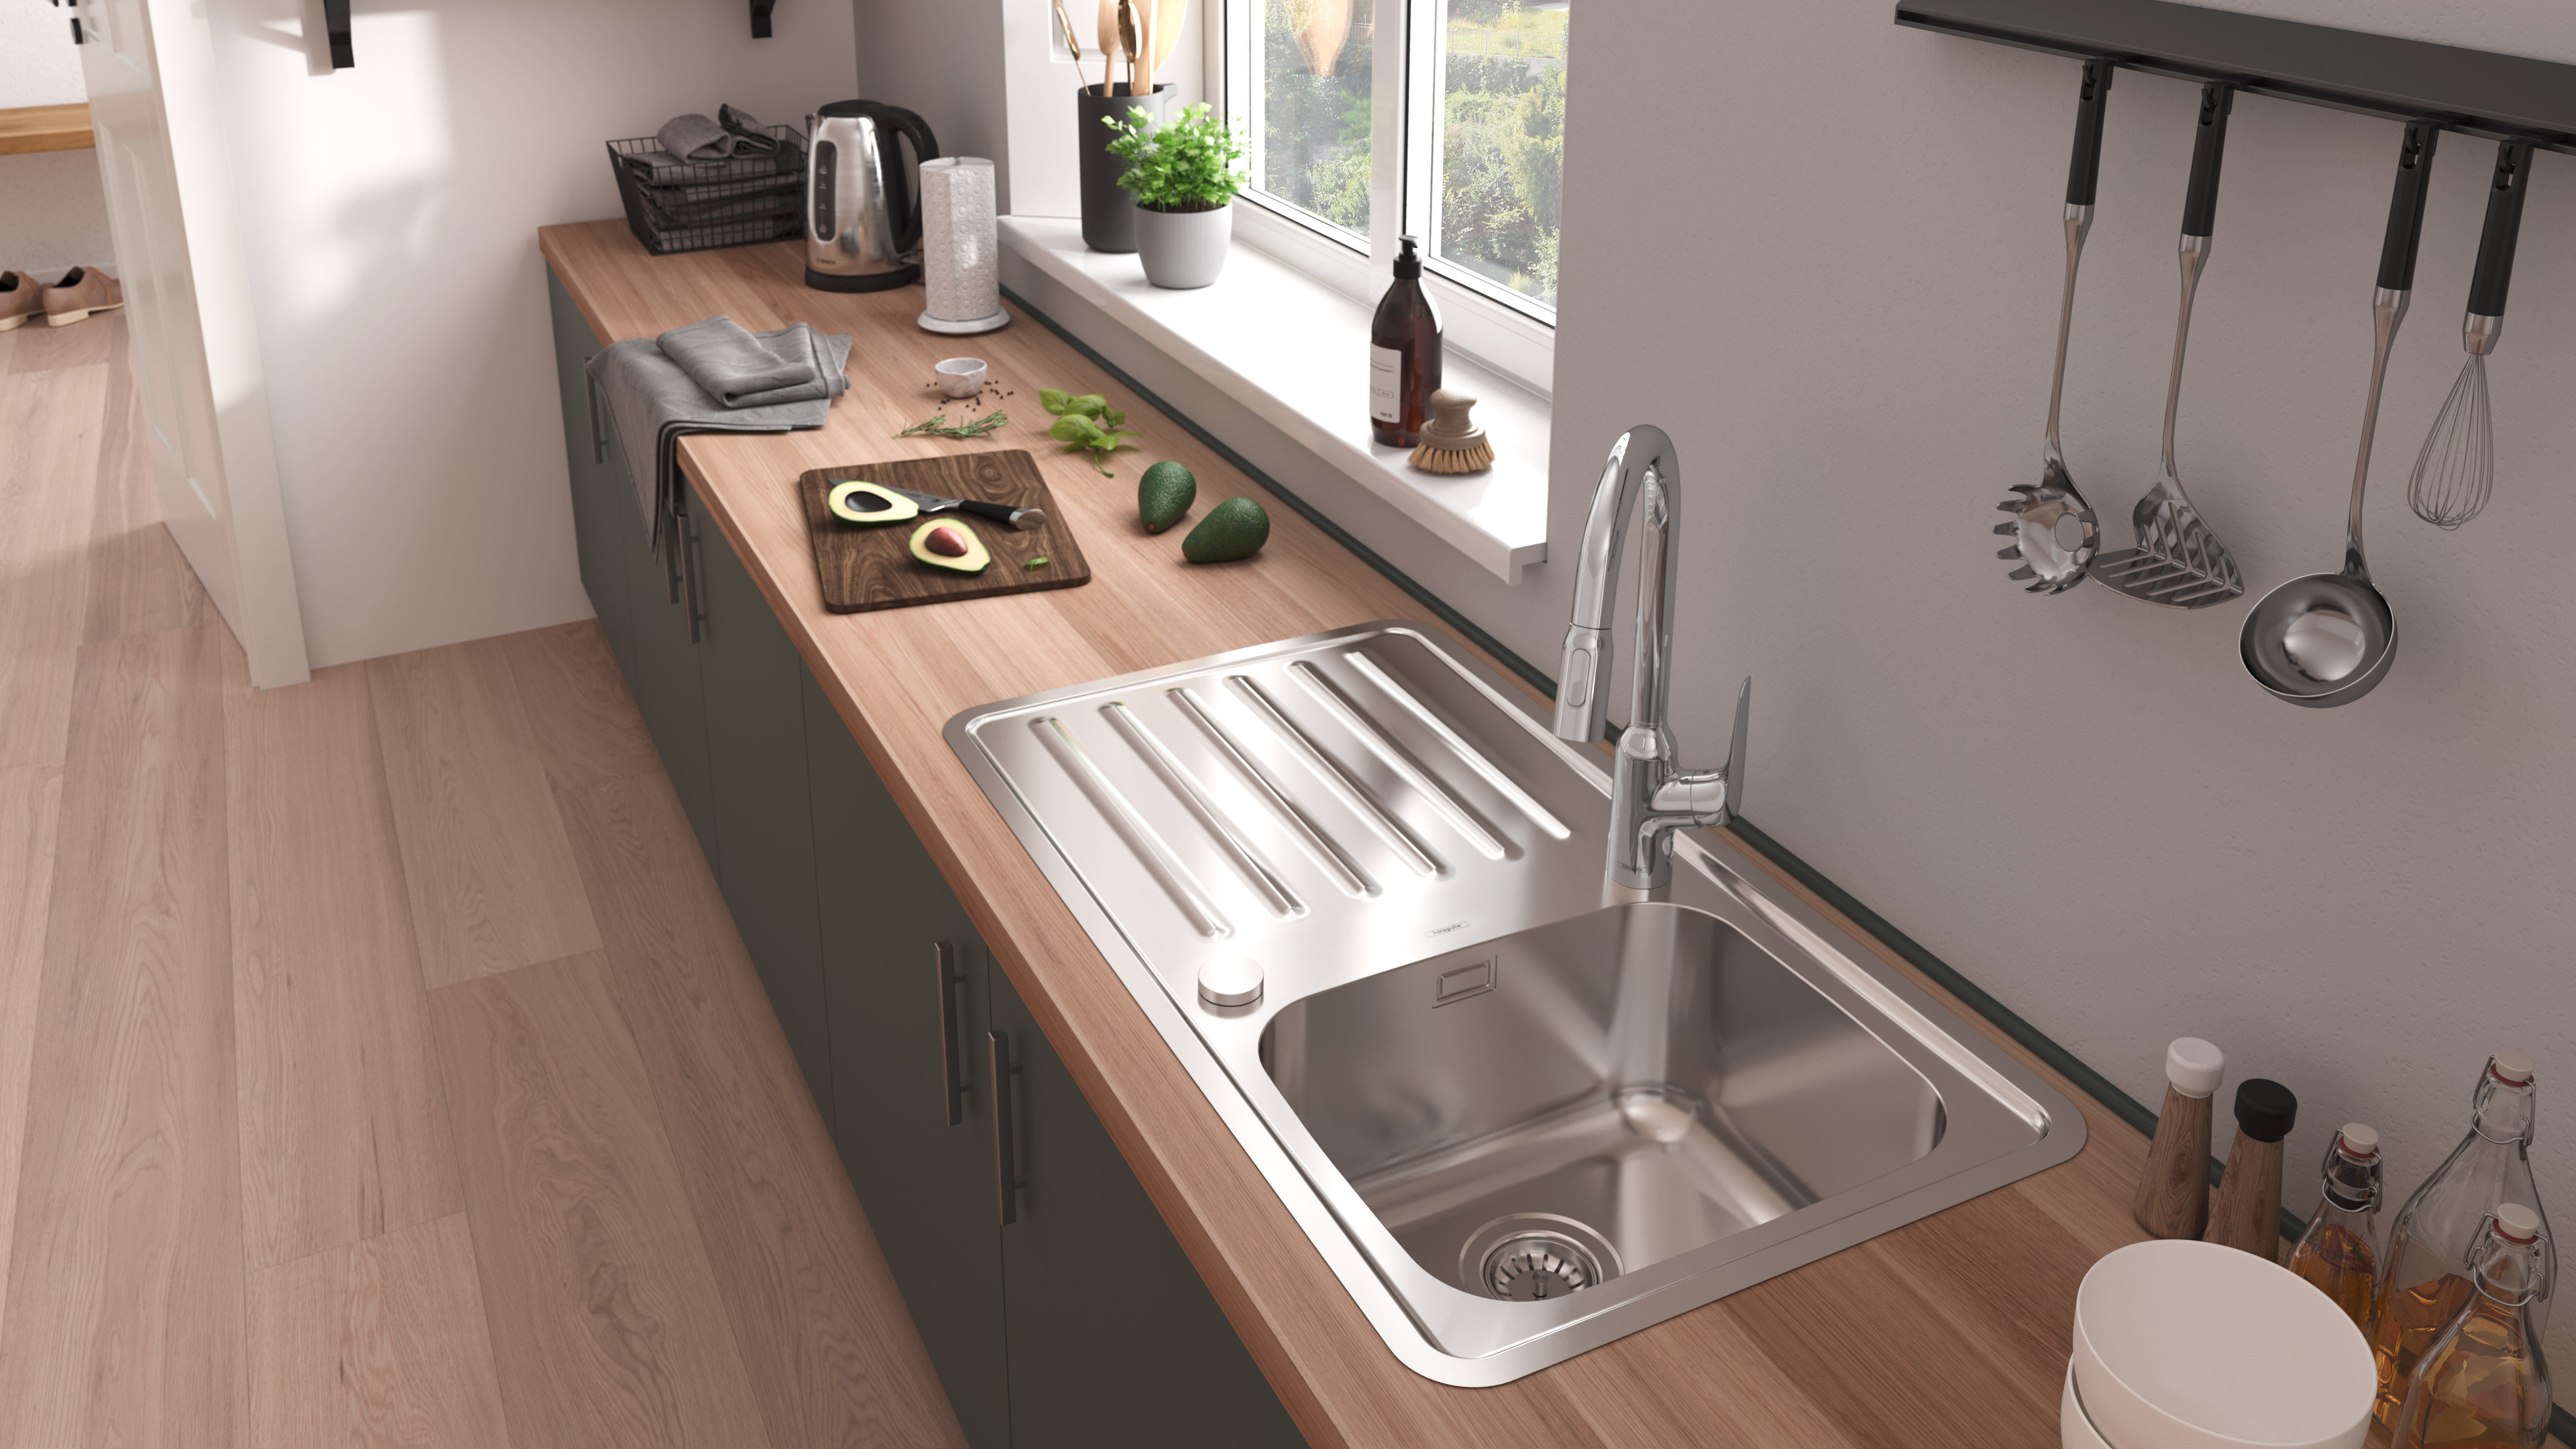 Kitchen Sink Stainless Steel S41 Key Visual 16x9 